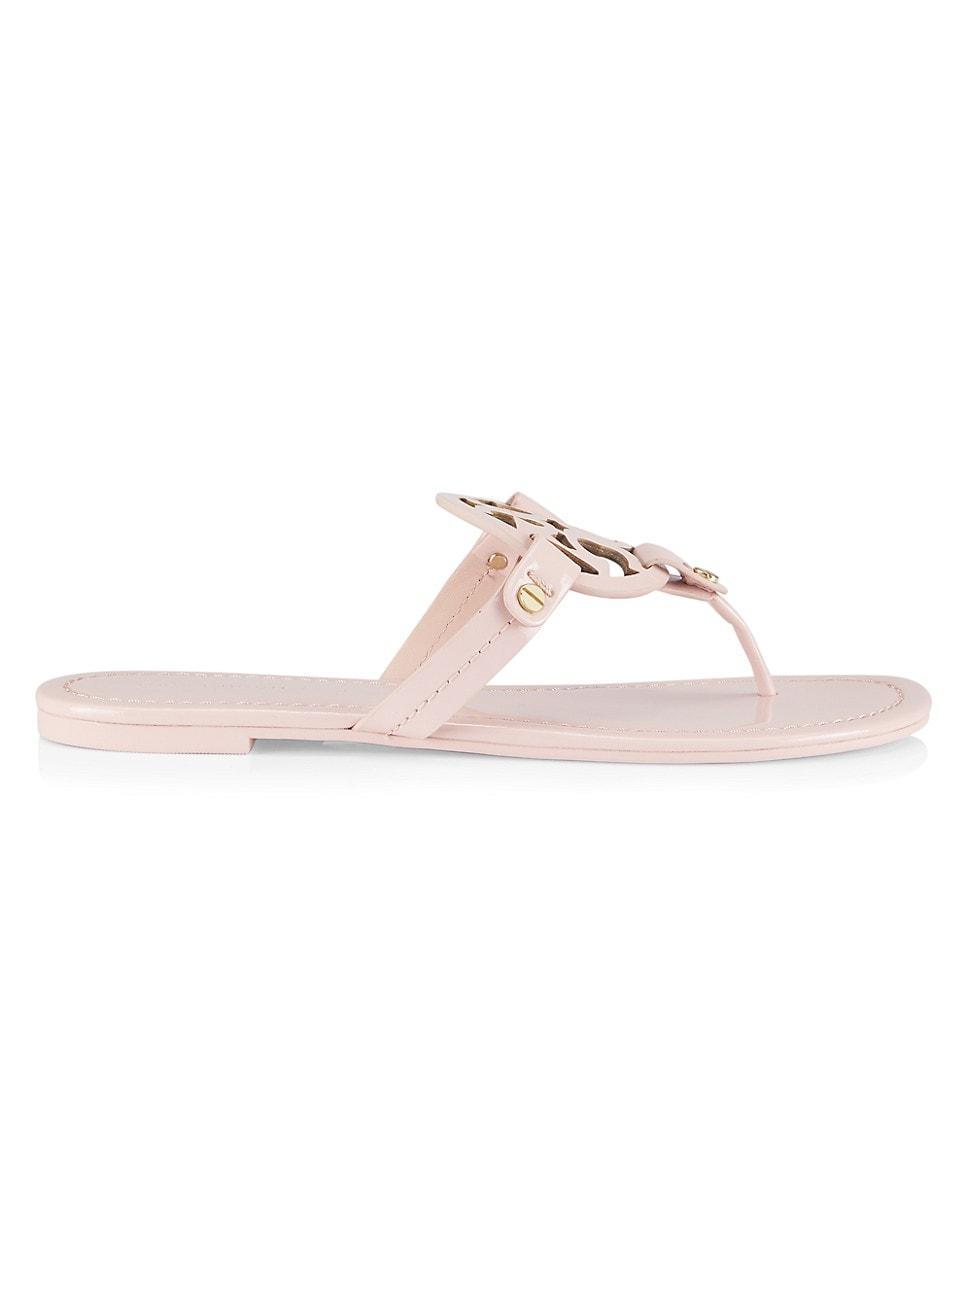 Tory Burch Miller Leather Sandal Product Image